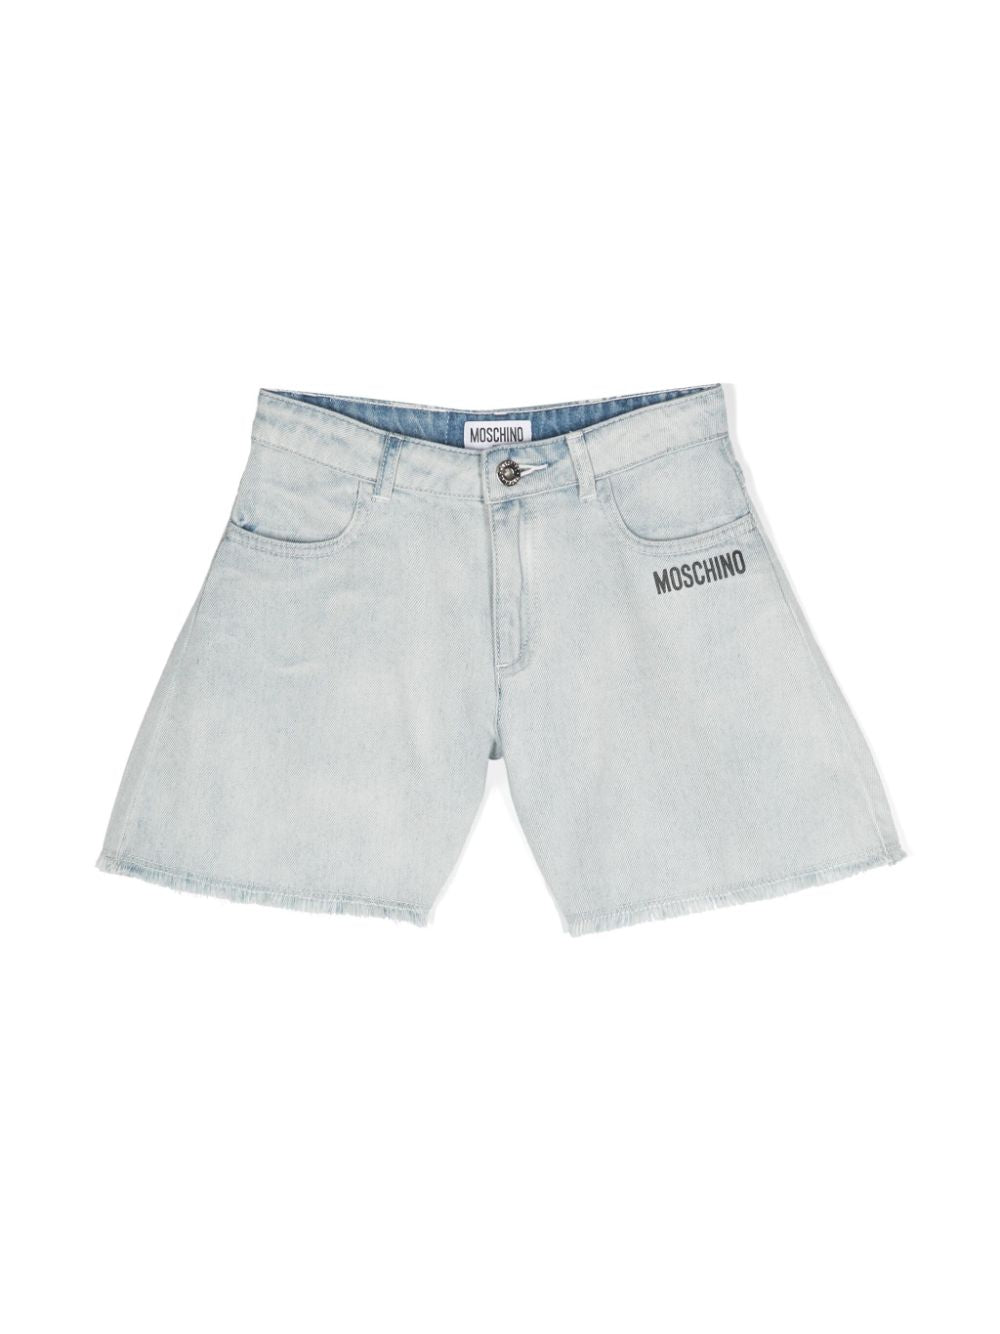 Moschino Kids shorts in jeans